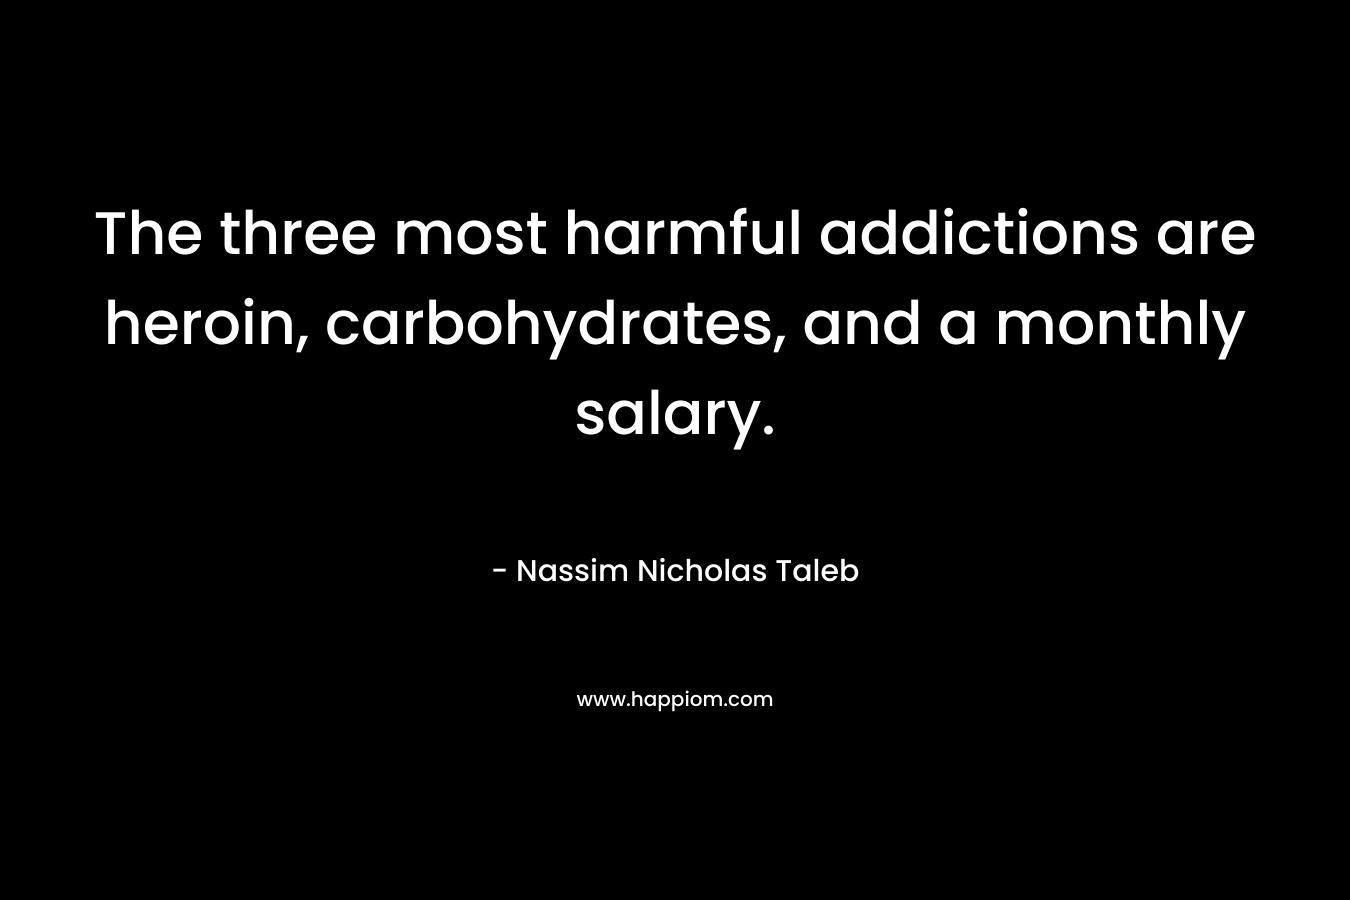 The three most harmful addictions are heroin, carbohydrates, and a monthly salary. – Nassim Nicholas Taleb